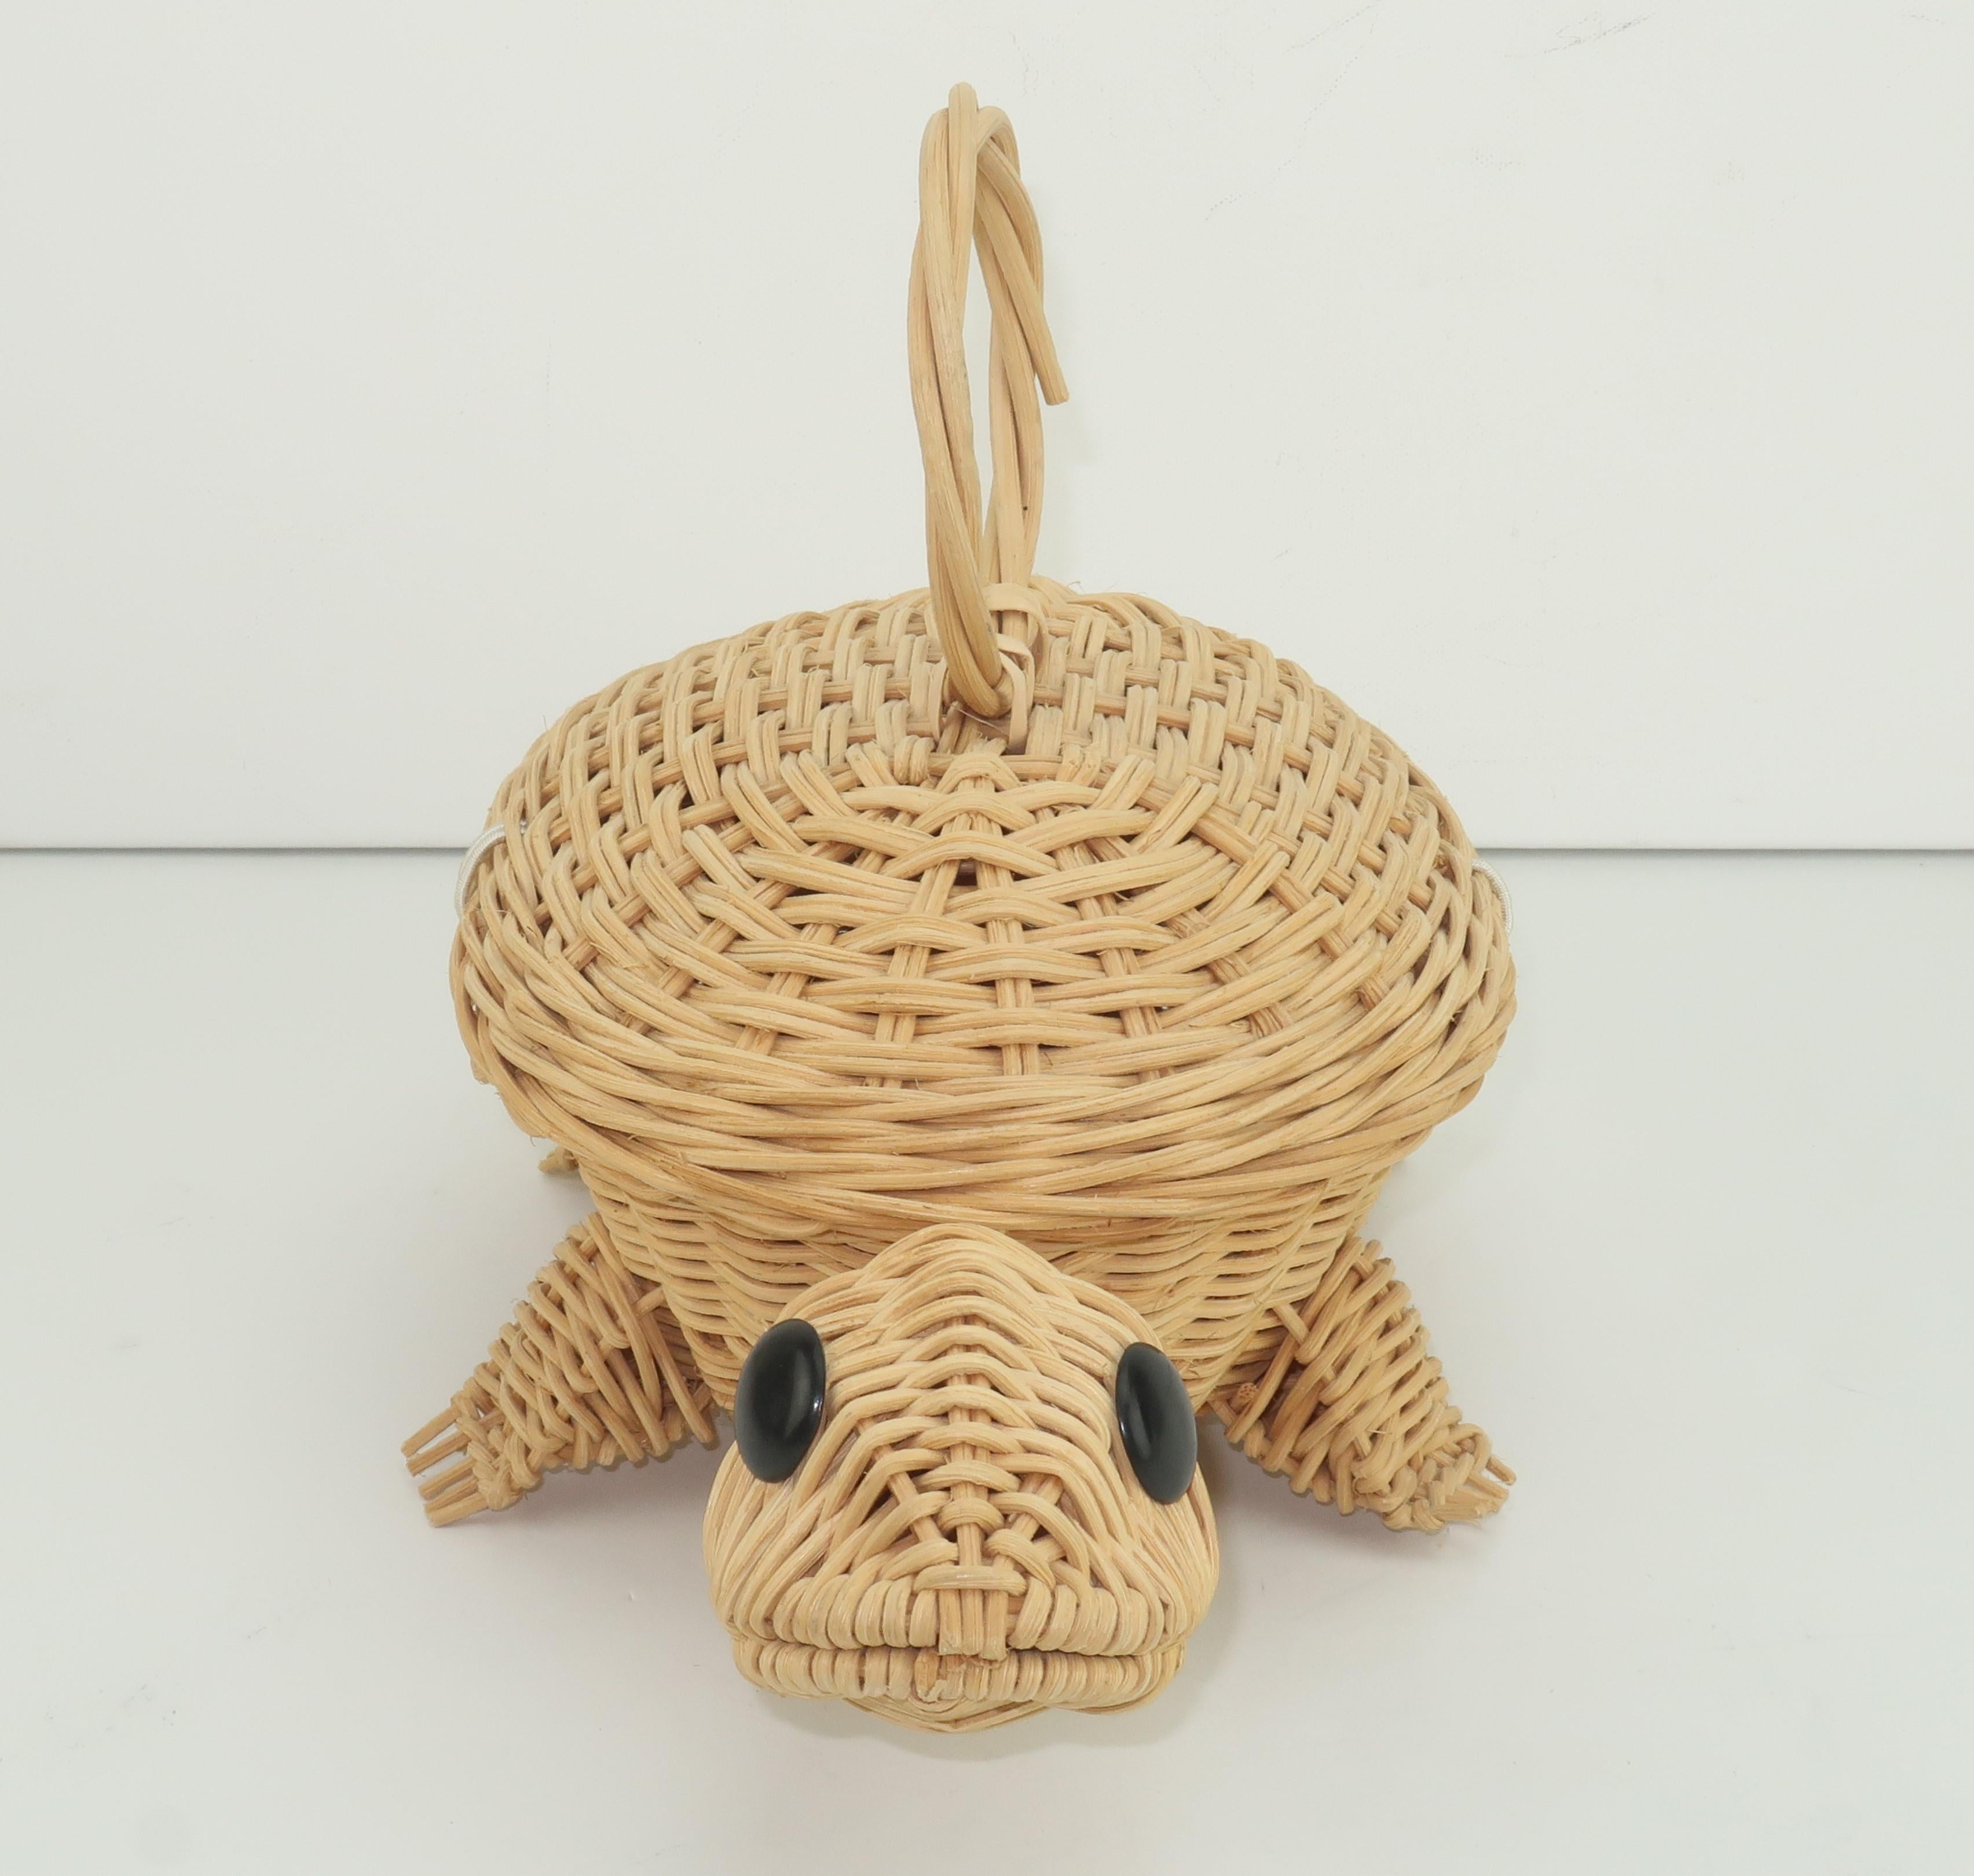 Adorable natural wicker basket handbag in the shape of a turtle on the move.  It has a ring shaped top handle with a black button and white elasticized cord closure which opens to a small but roomy interior.  He is the perfect accessory for a